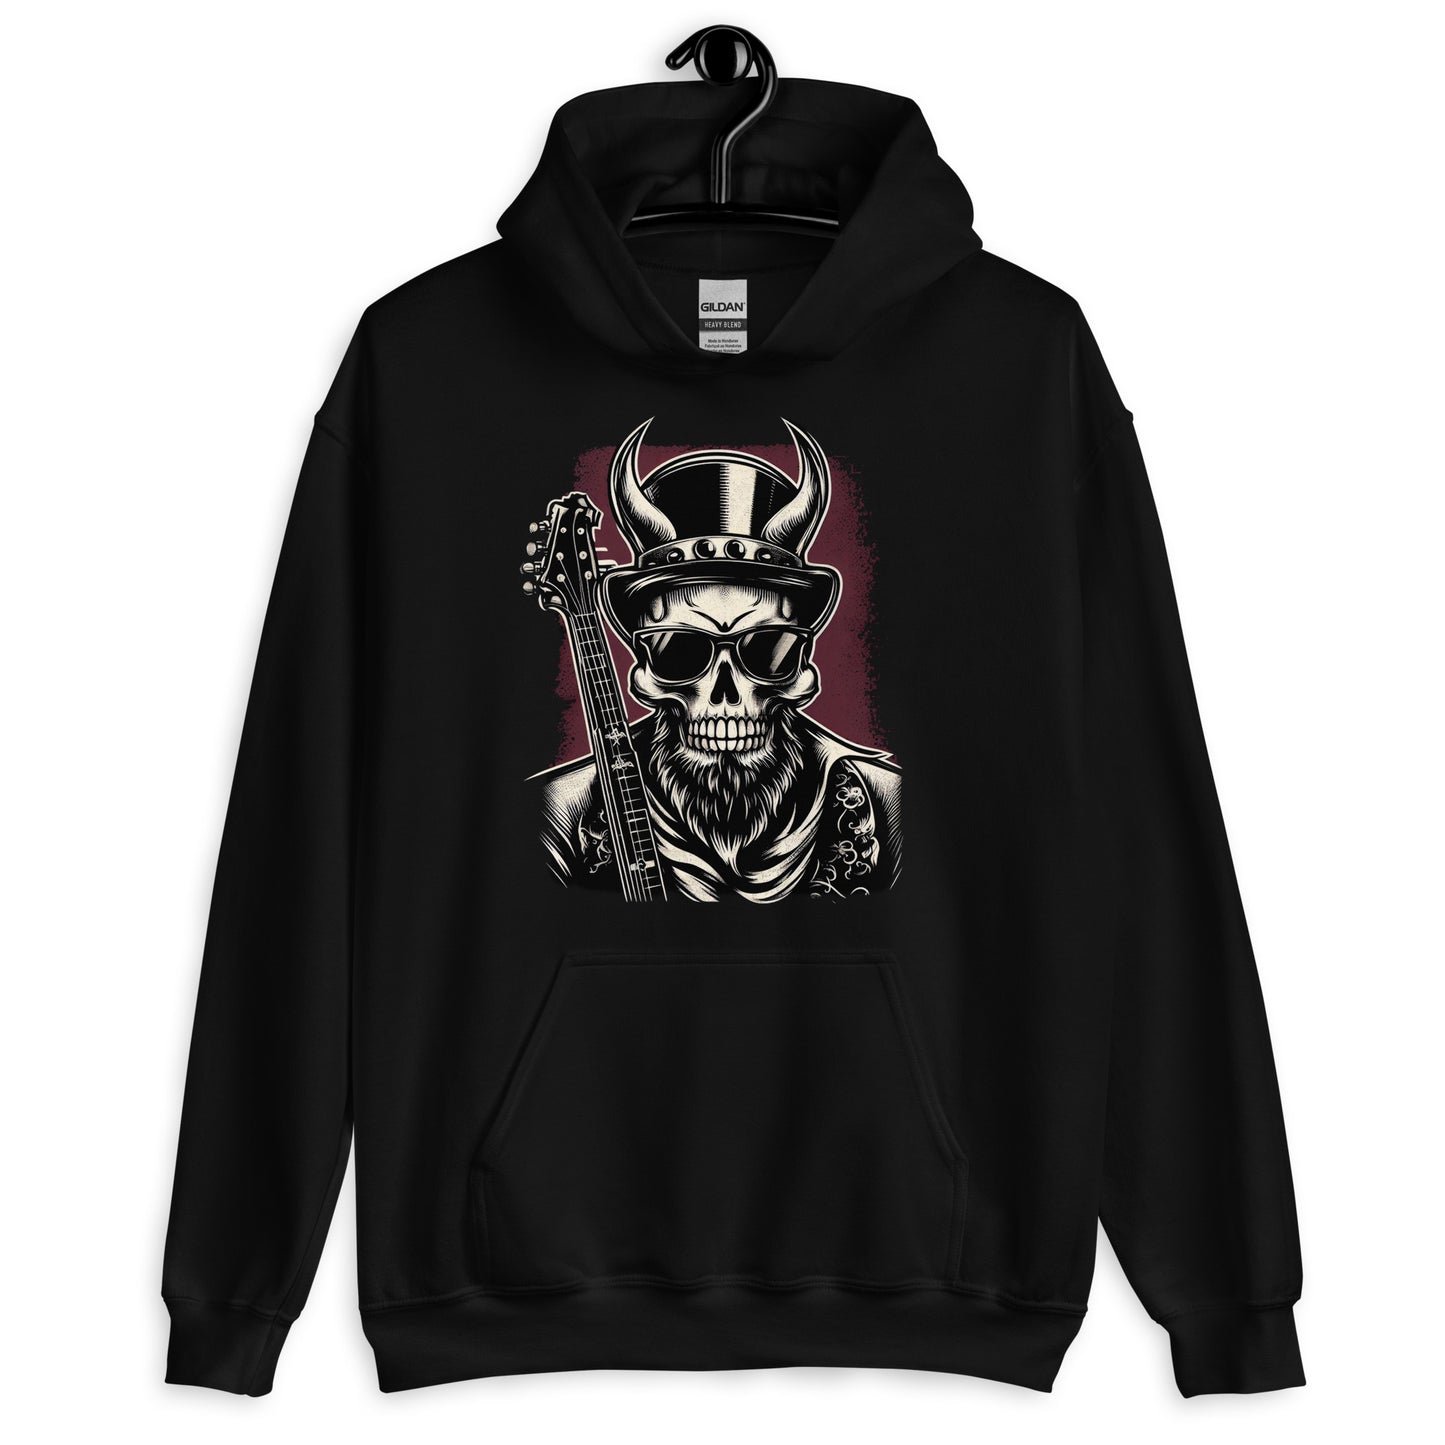 Rock 'n' Roll Devil Anthem – Hoodie Edition for Rebels with Style